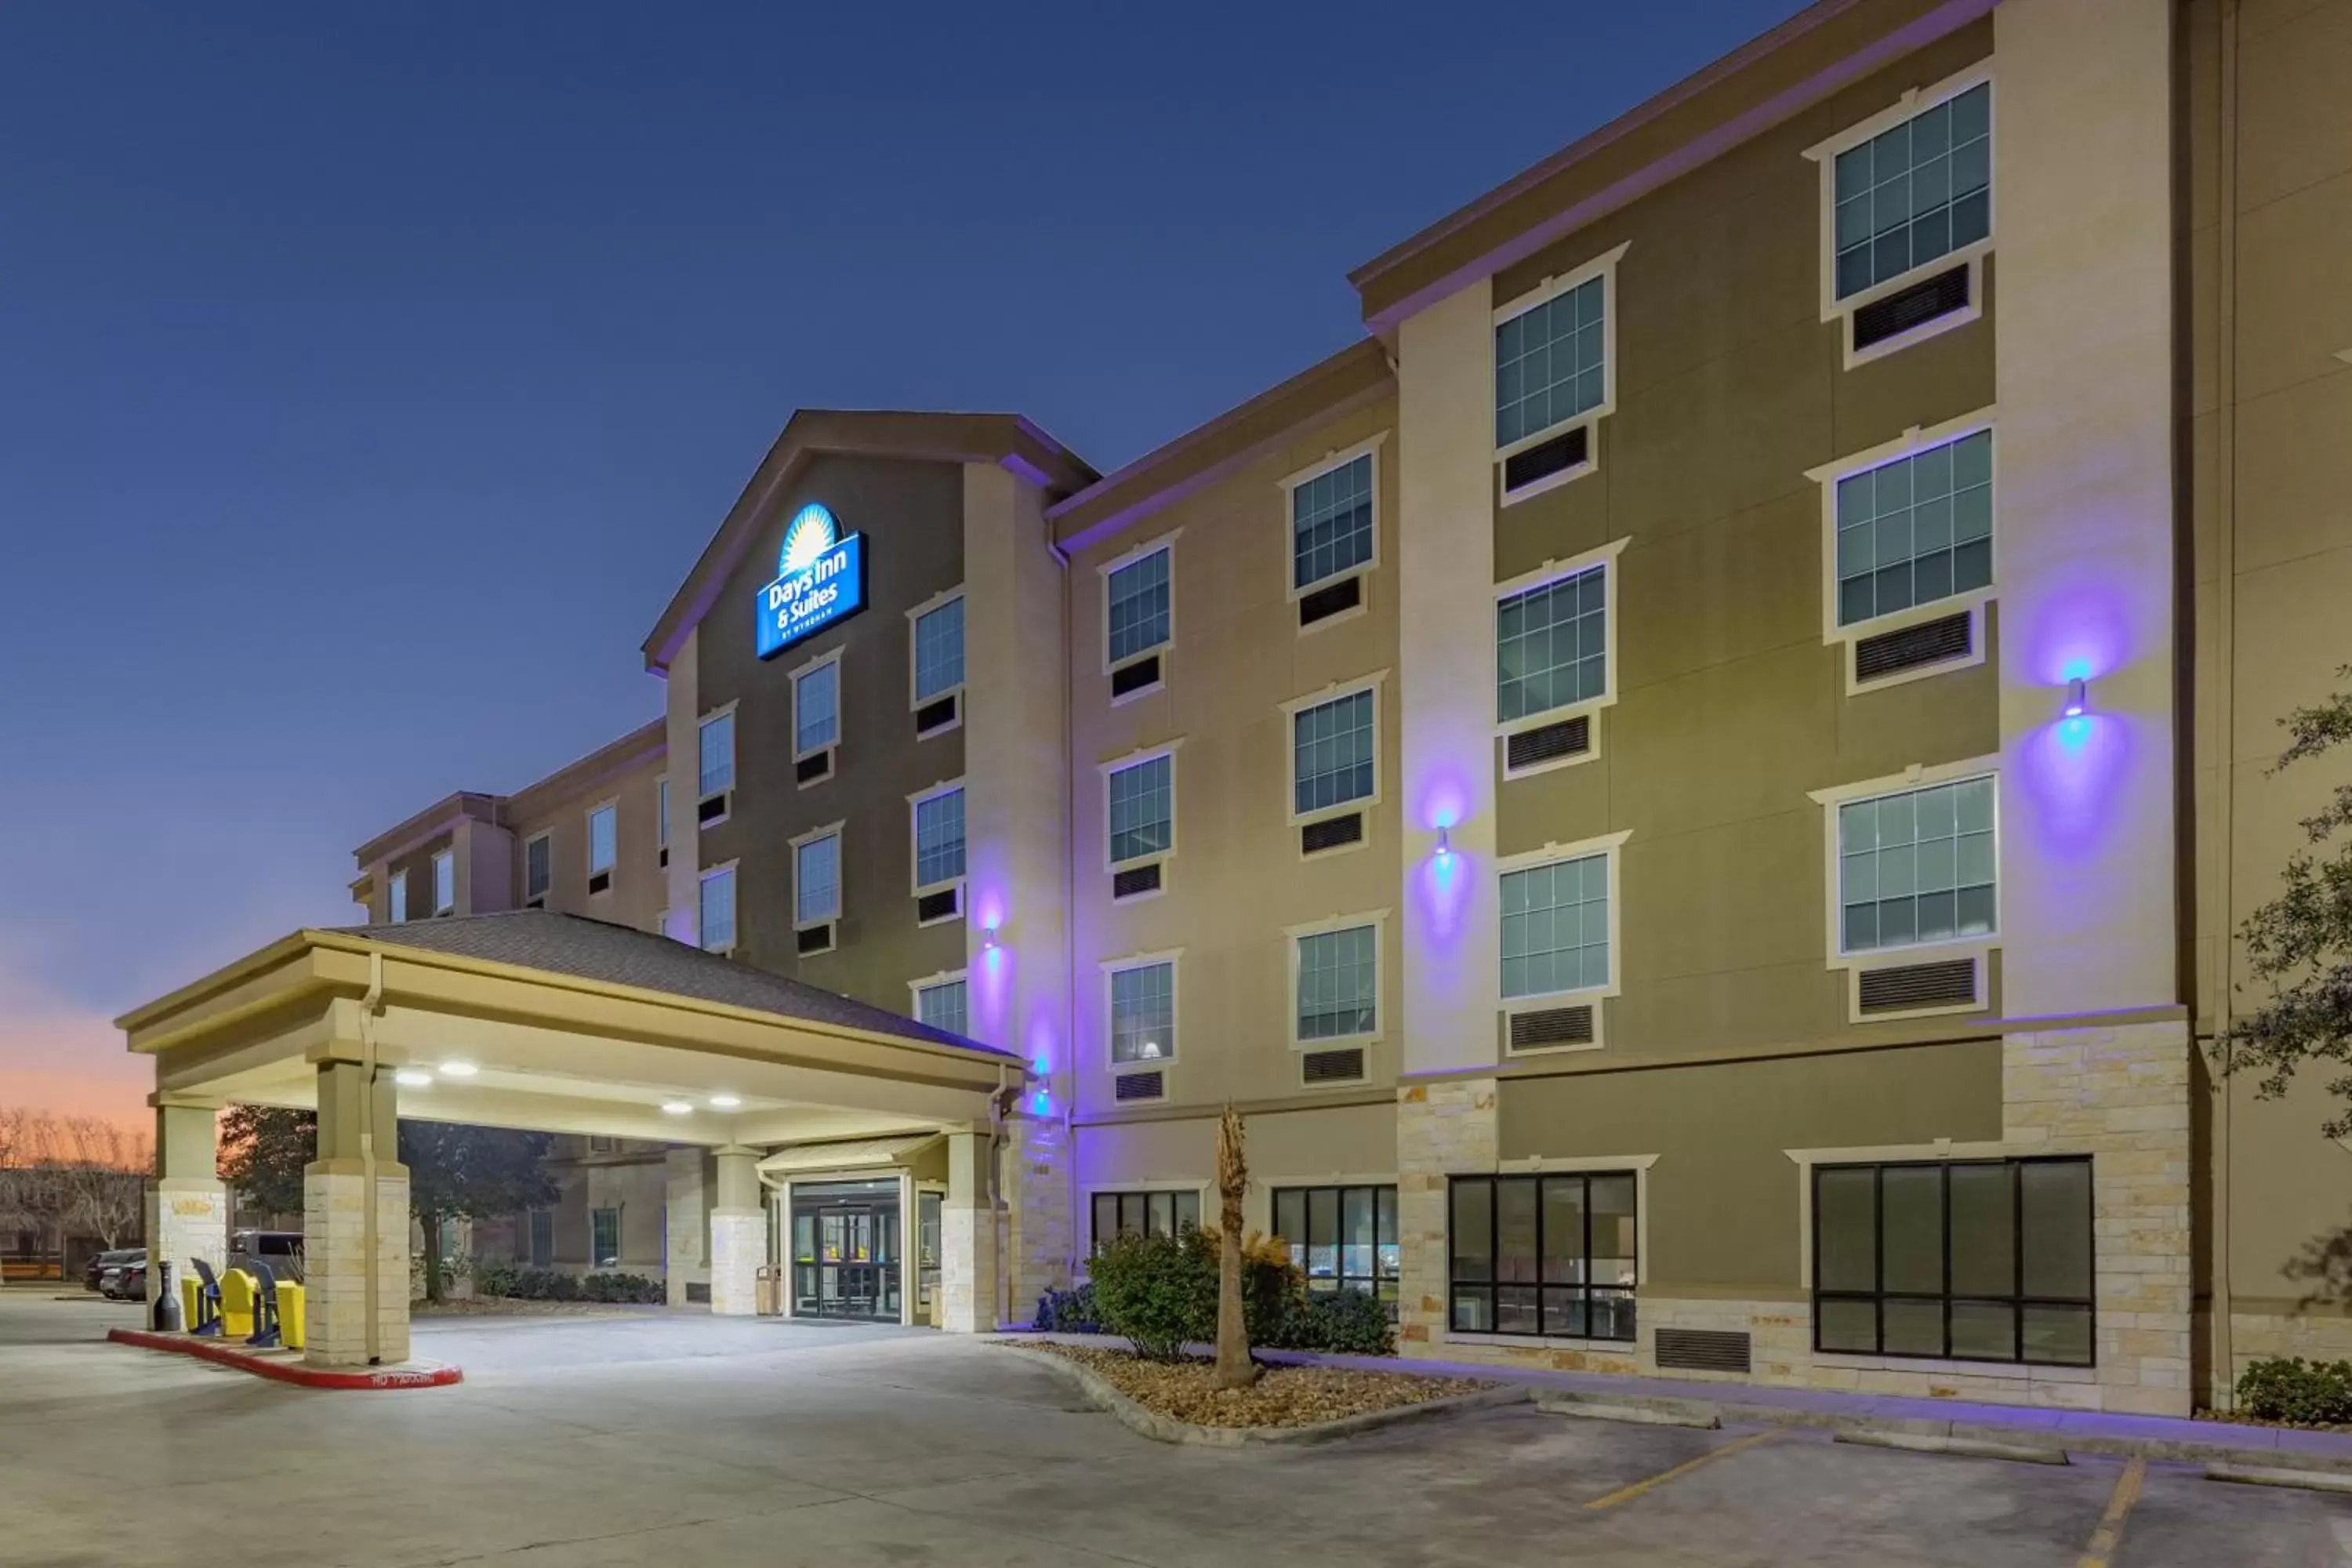 Property Building in Days Inn & Suites by Wyndham San Antonio near AT&T Center